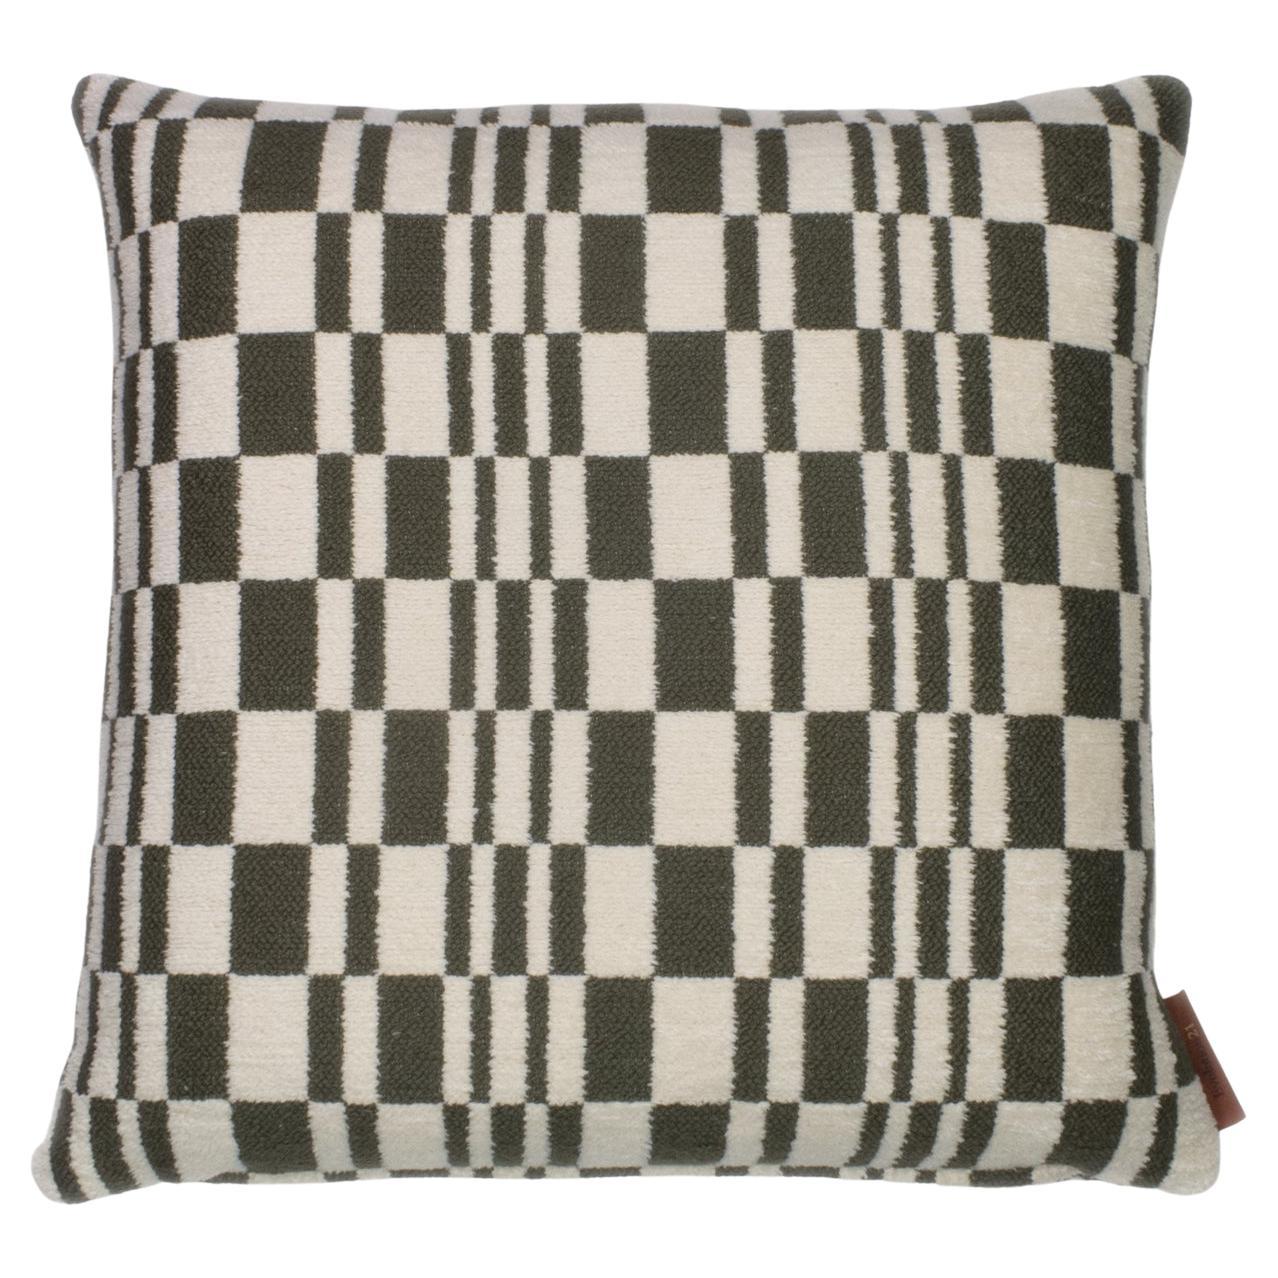 Cushion / Pillow Chess Khaki by Evolution21 For Sale